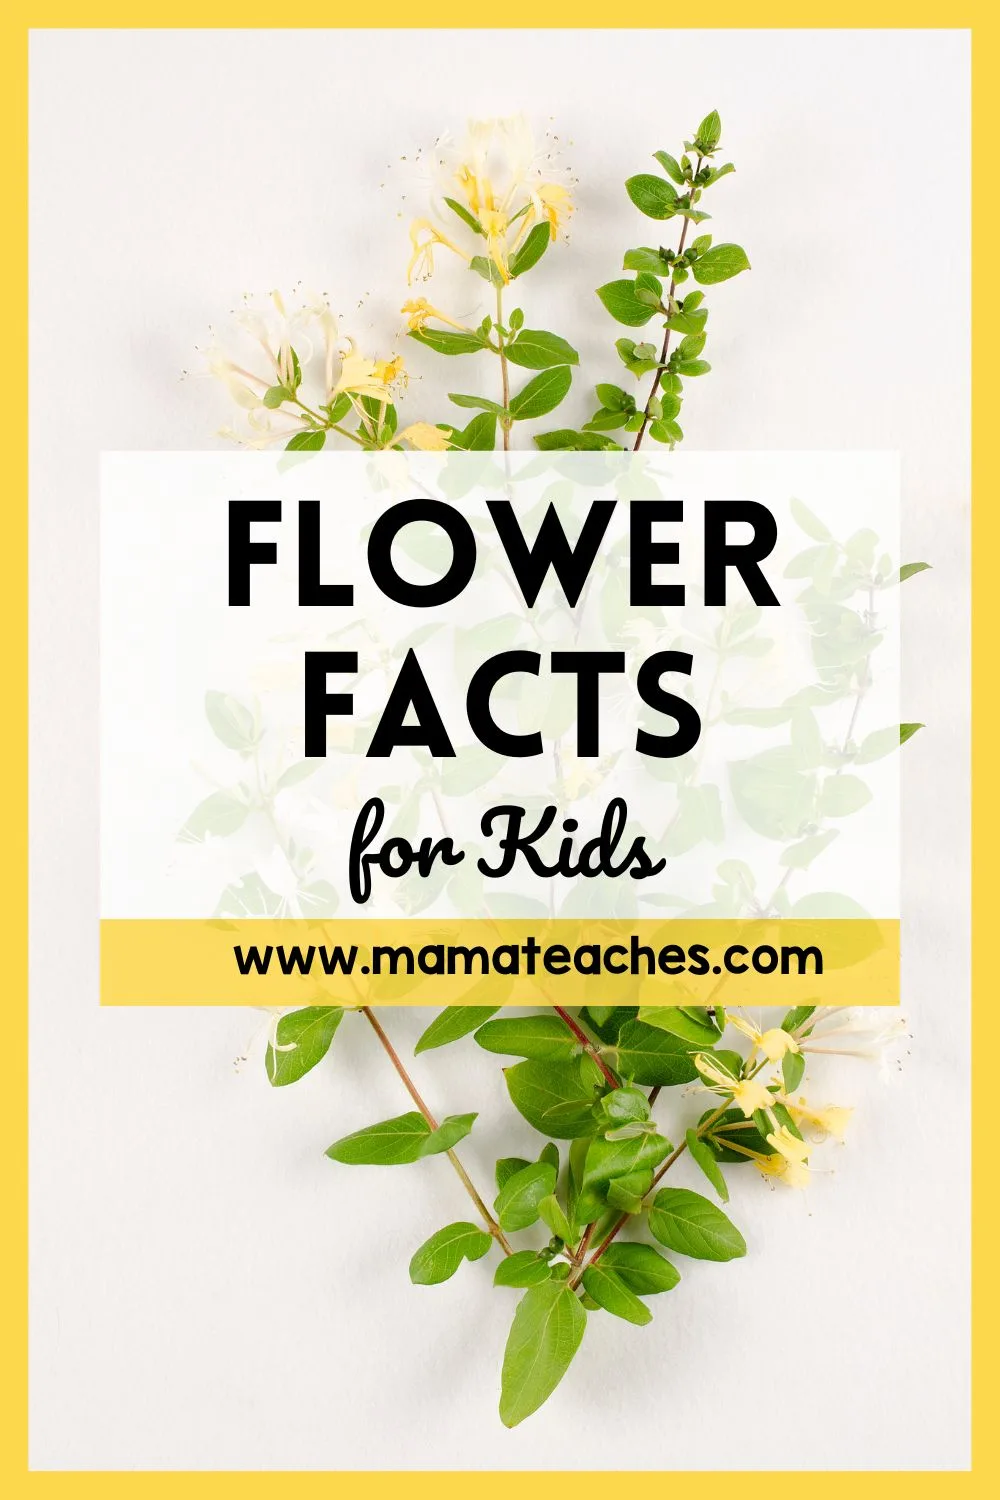 Flower Facts for Kids